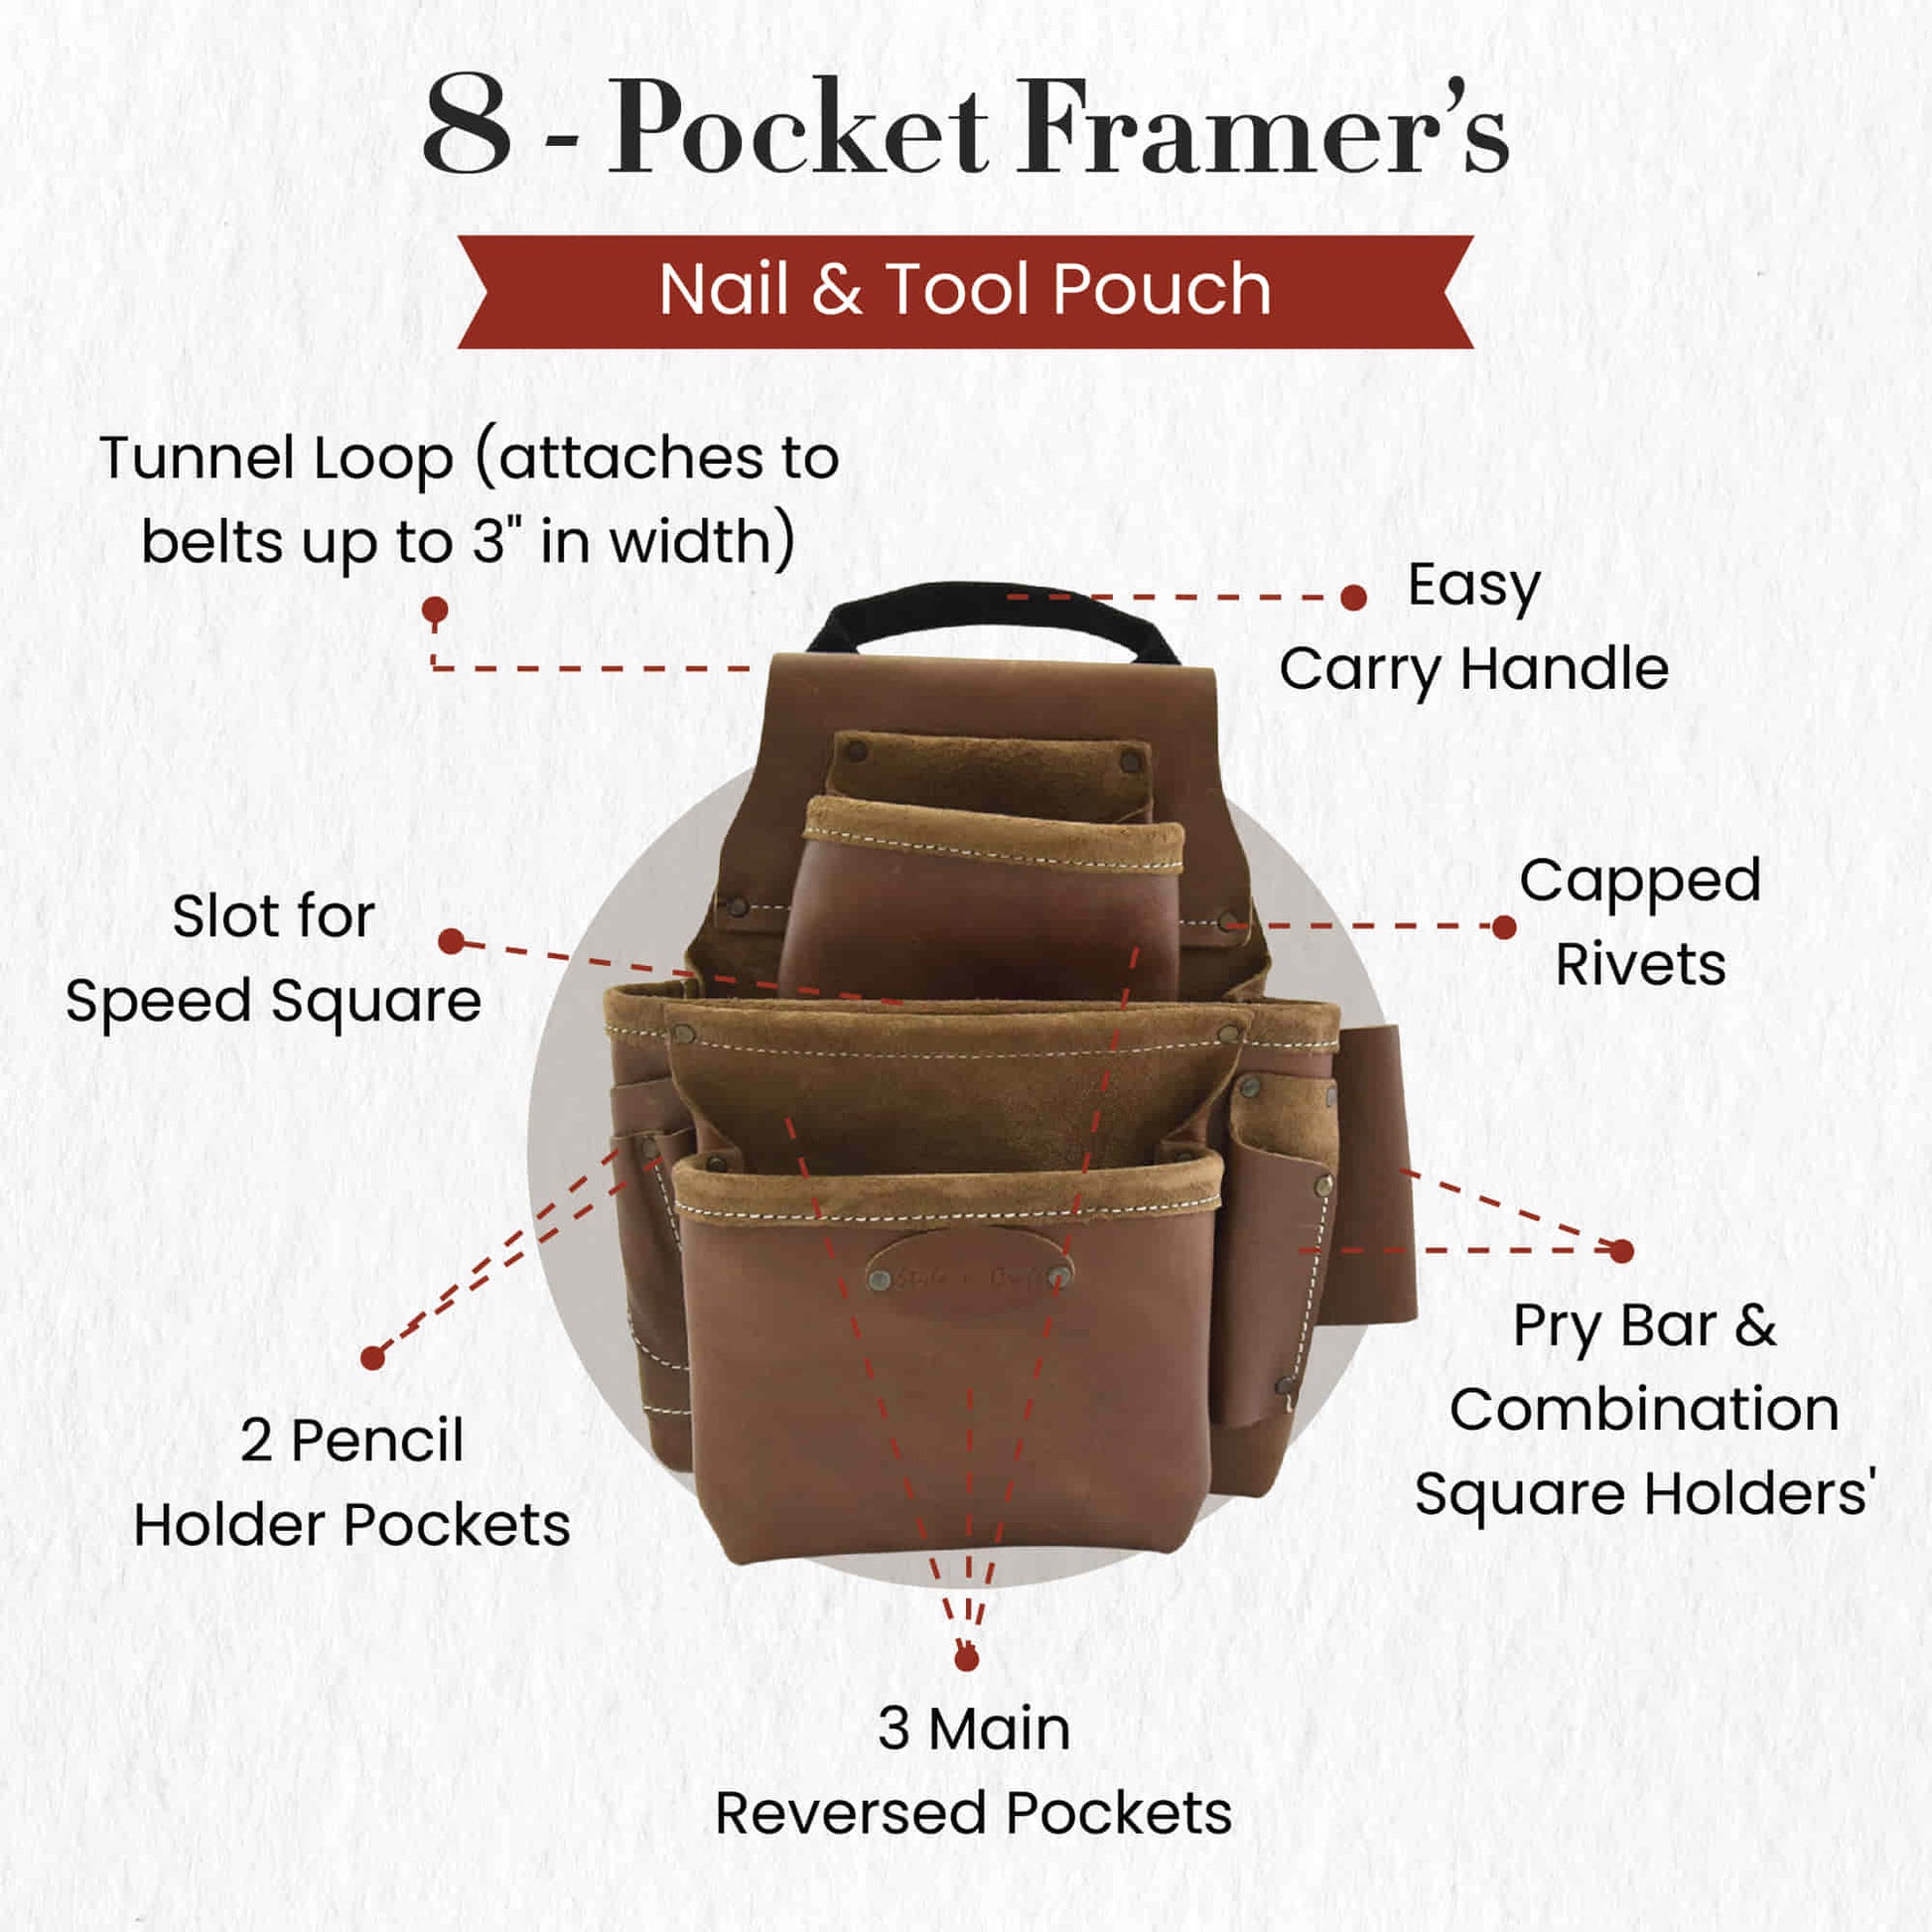 Style n Craft 98436 - 8 Pocket Framer's Nail and Tool Pouch in Full Grain Leather in Dark Tan Color - Front view showing the details  - front pouch , pencil pockets, speed square slot, prybar & combination square holder along with a smaller top pocket and easy carry handle on the top of the pouch